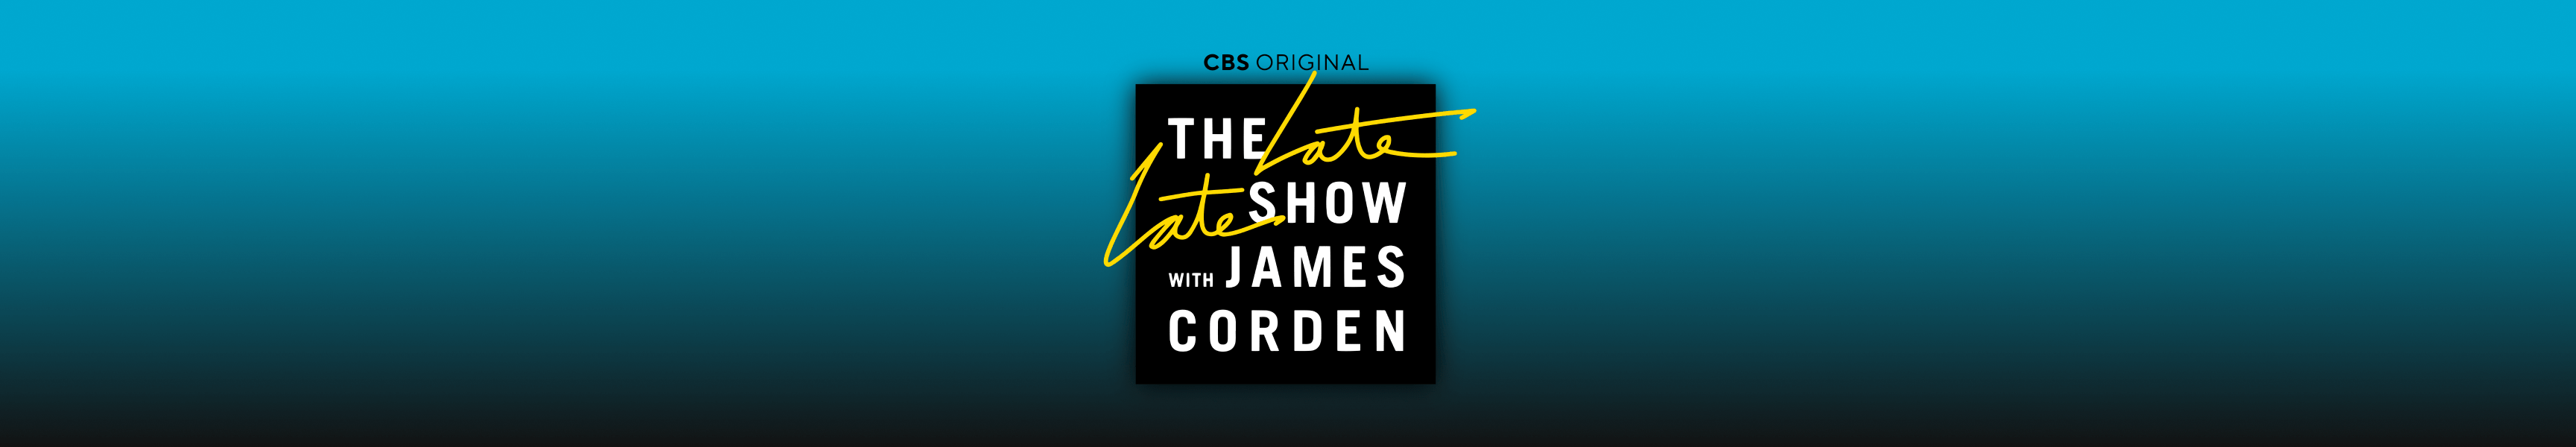 Late Late Show with James Corden